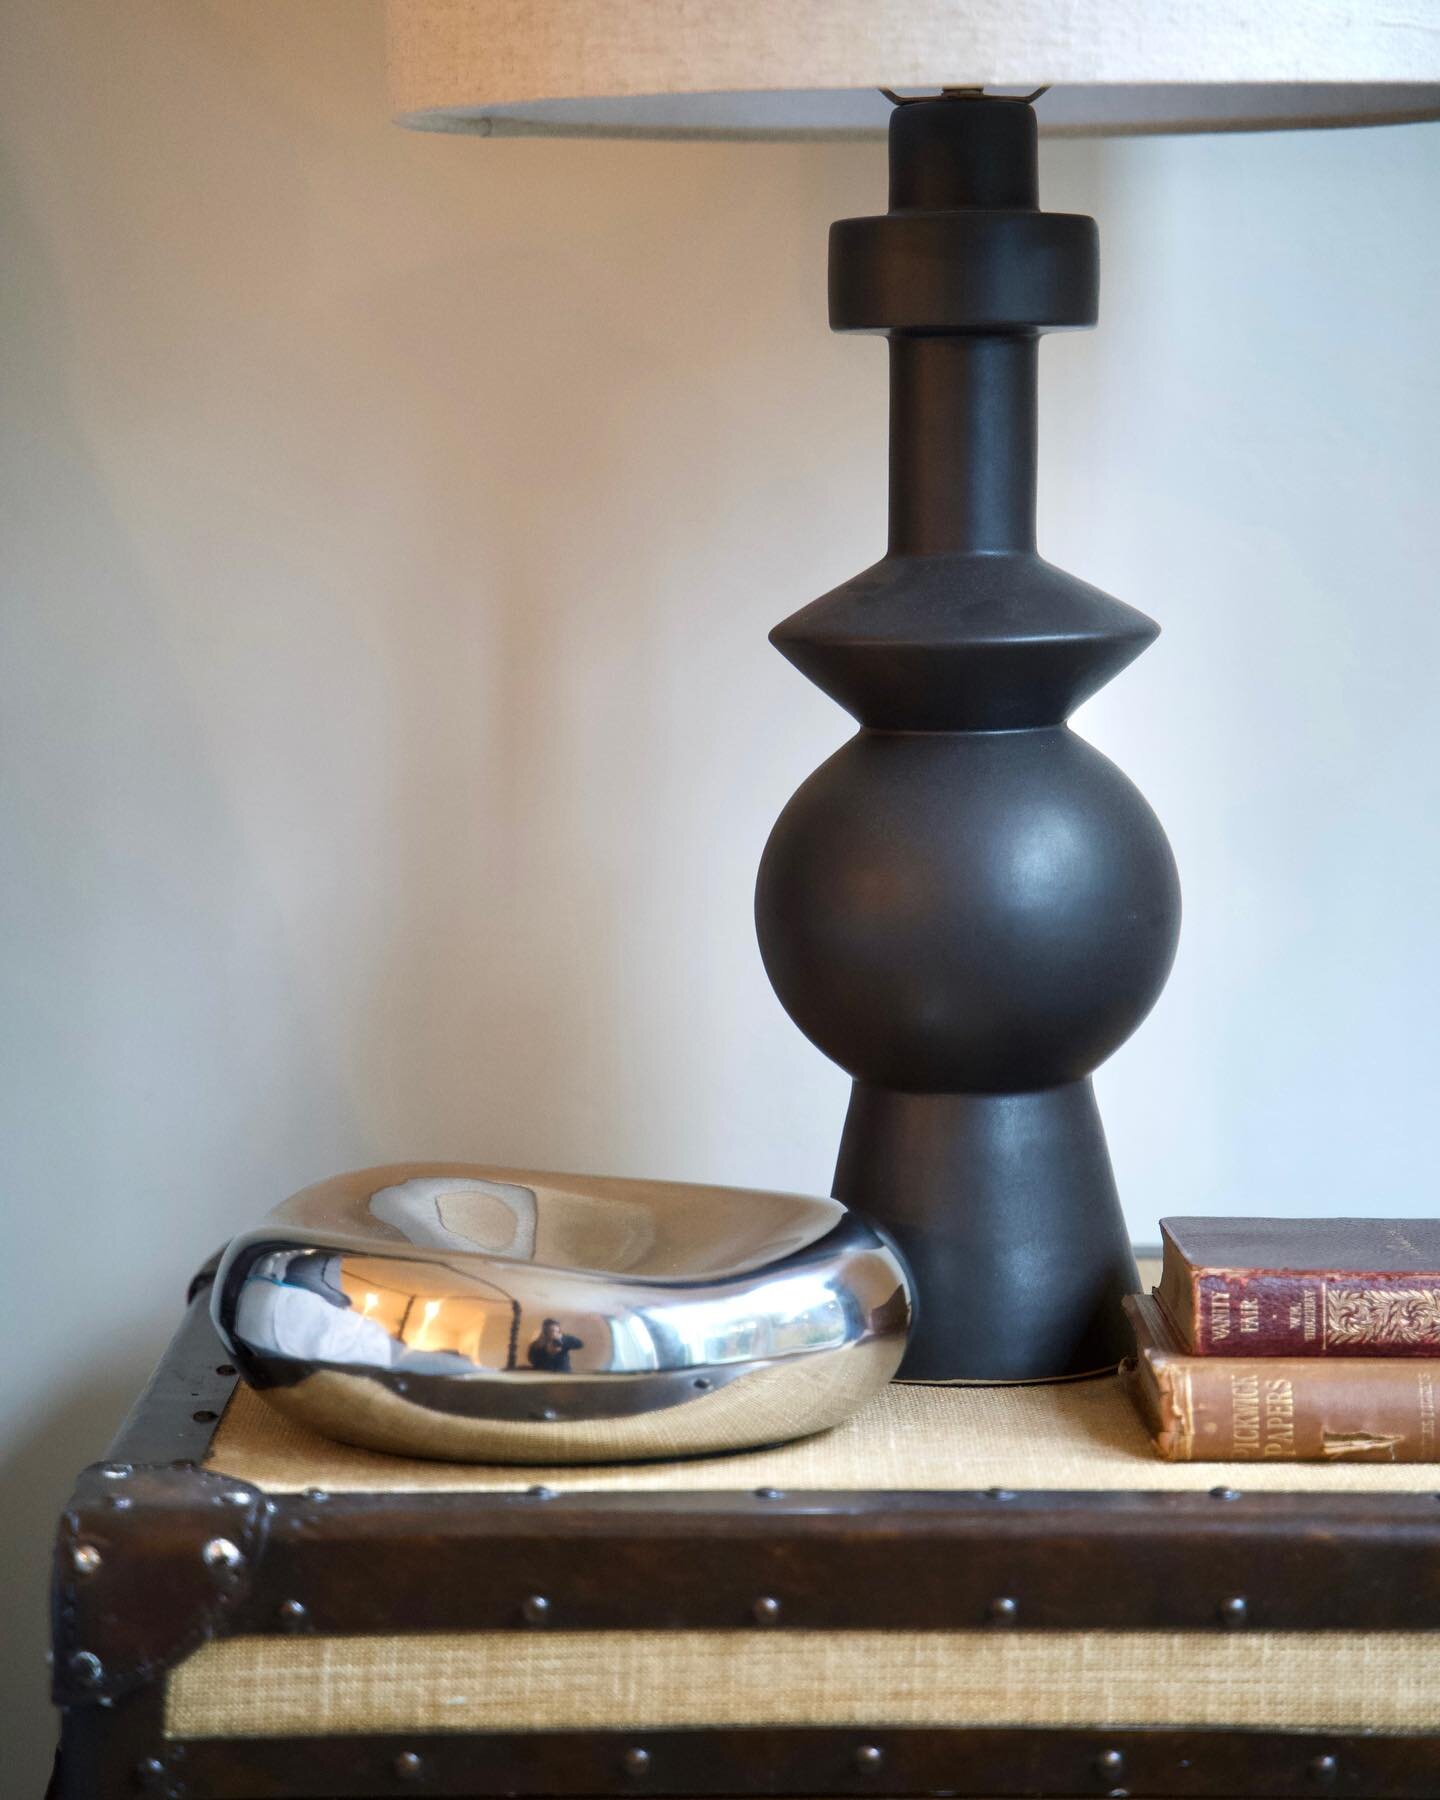 Mixing past and present, old and new, dark and light always adds some「 f l a v o r 」

We brought this classic burlap trunk nightstand into modern day by adding a totem table lamp and chrome dish for accessories. The vintage books are from the clients